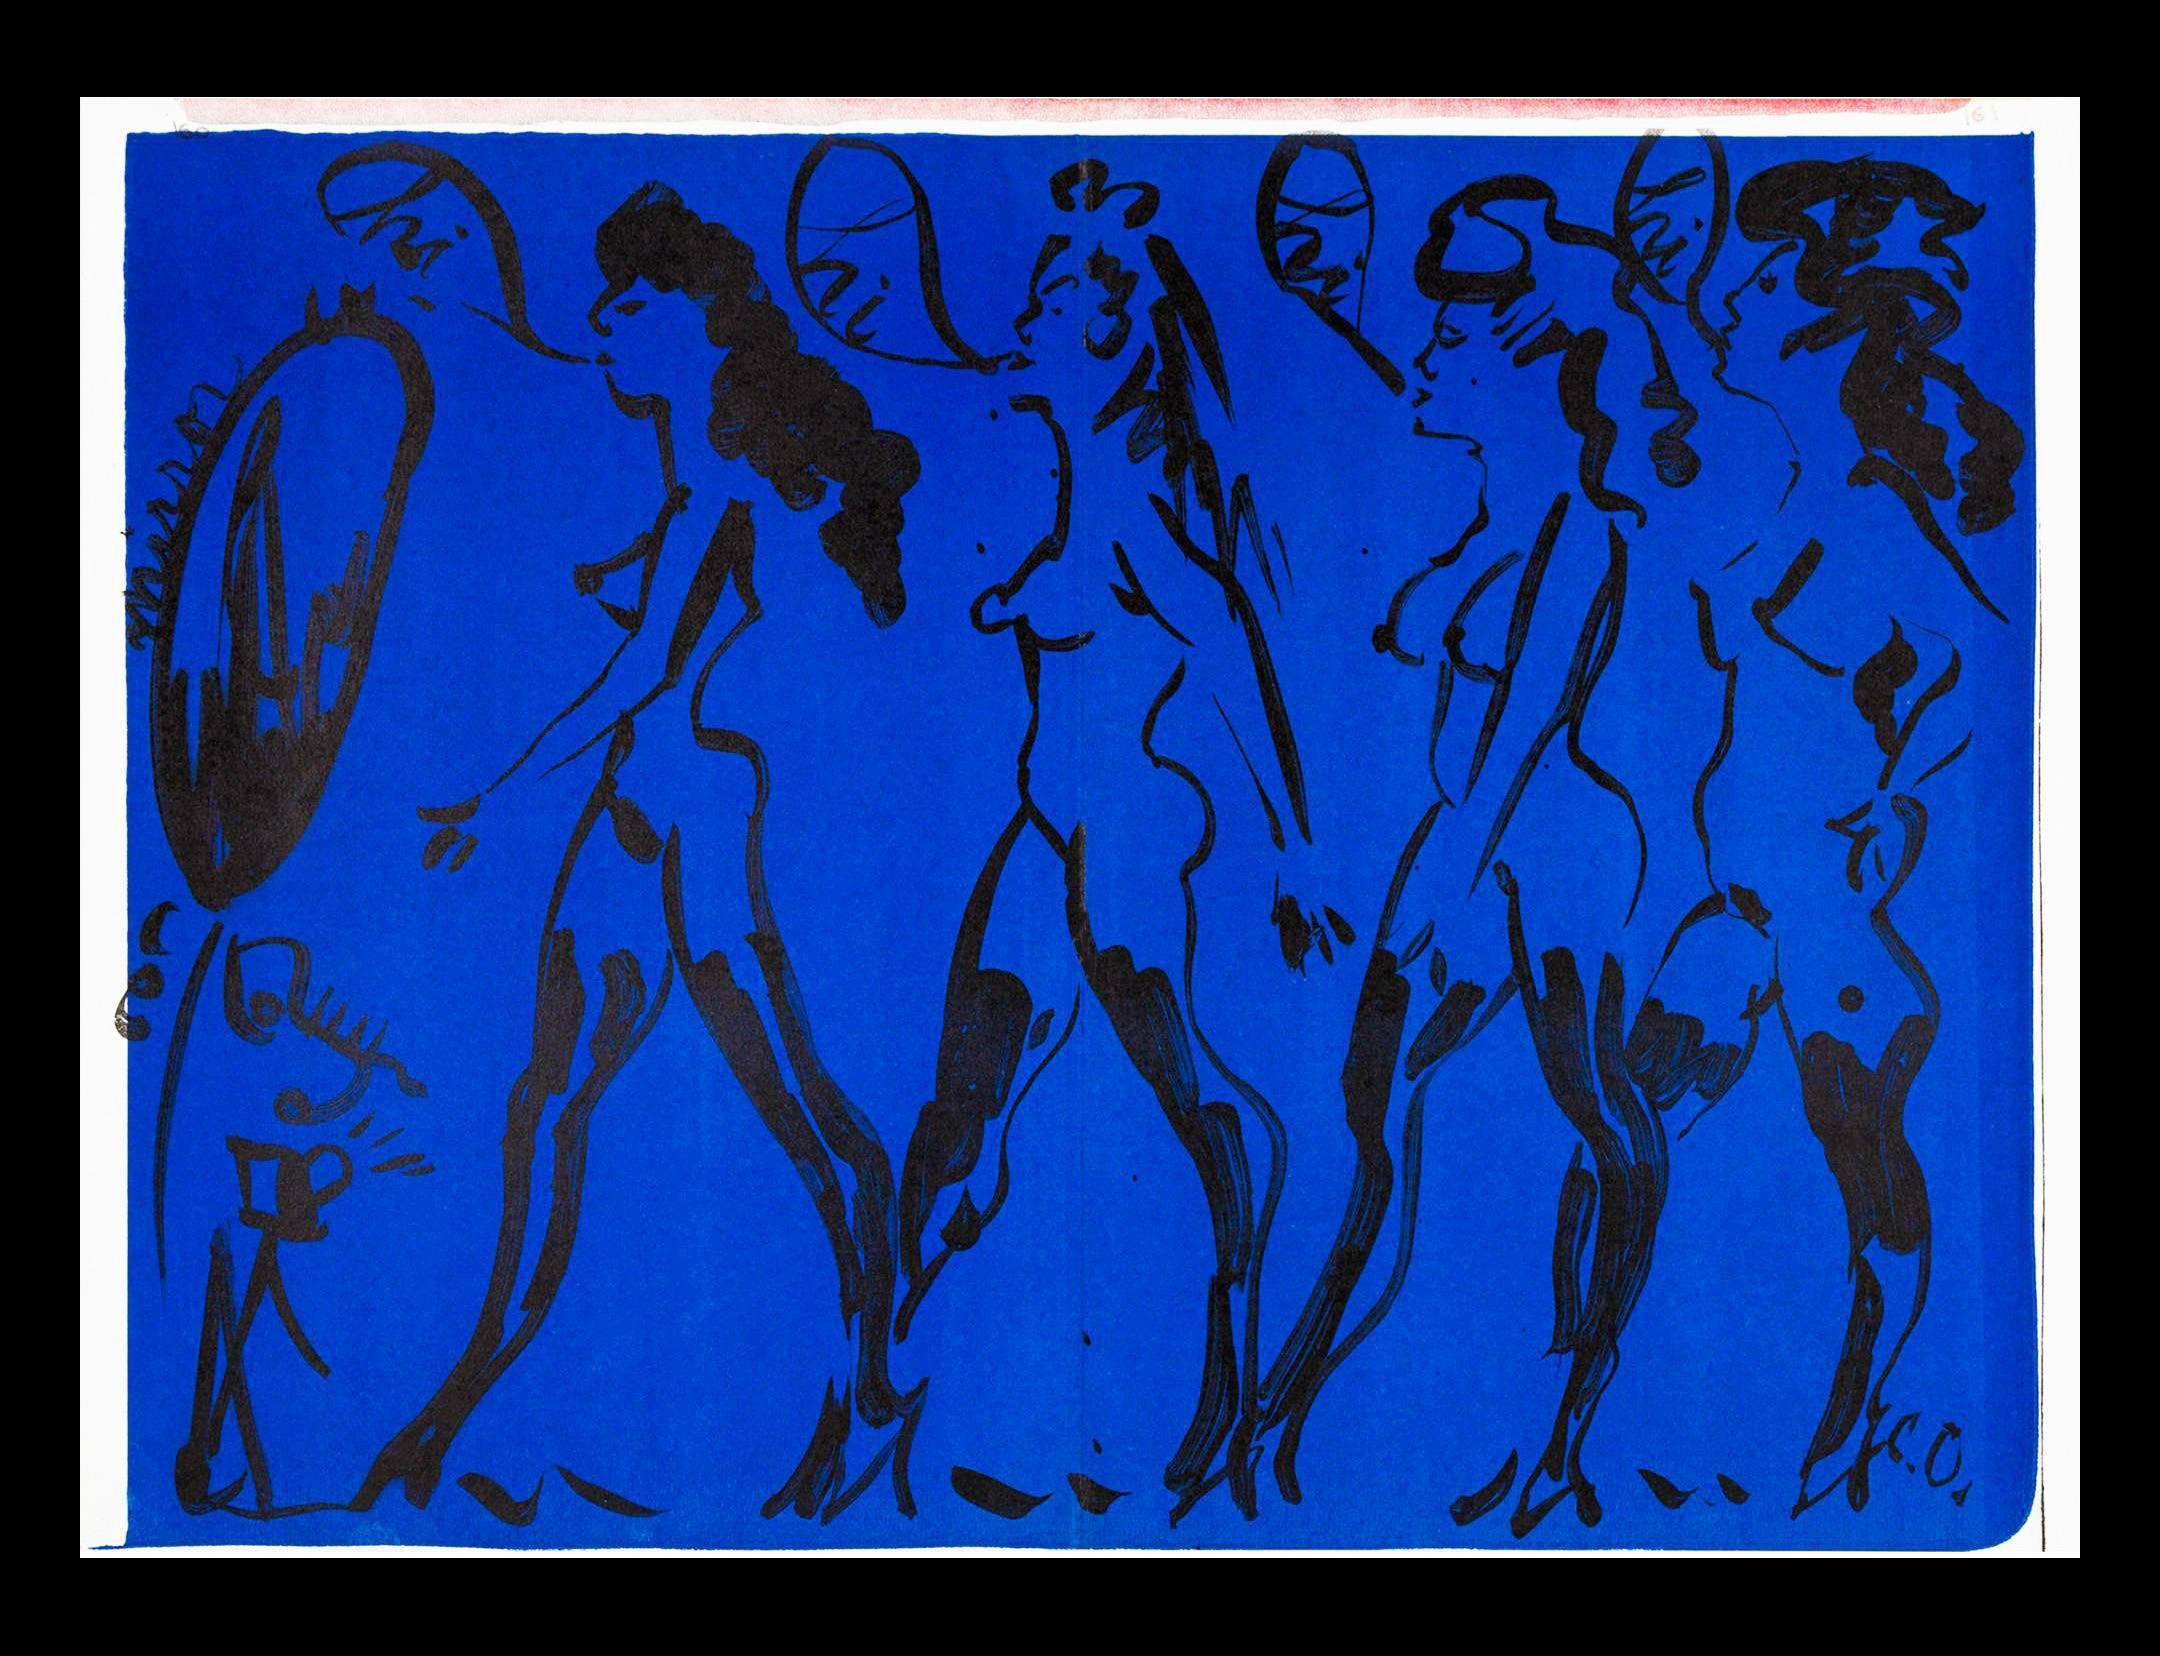 Claes Oldenburg
Parade of Women (from One Cent Life), 1964

Lithograph printed in colors
16.25 x 22.75 in (41.28 x 57.79 cm)
Minor signs of handling; otherwise excellent
Edition of 2000
Plate signed on lower right 

1 Cent Life was a landmark